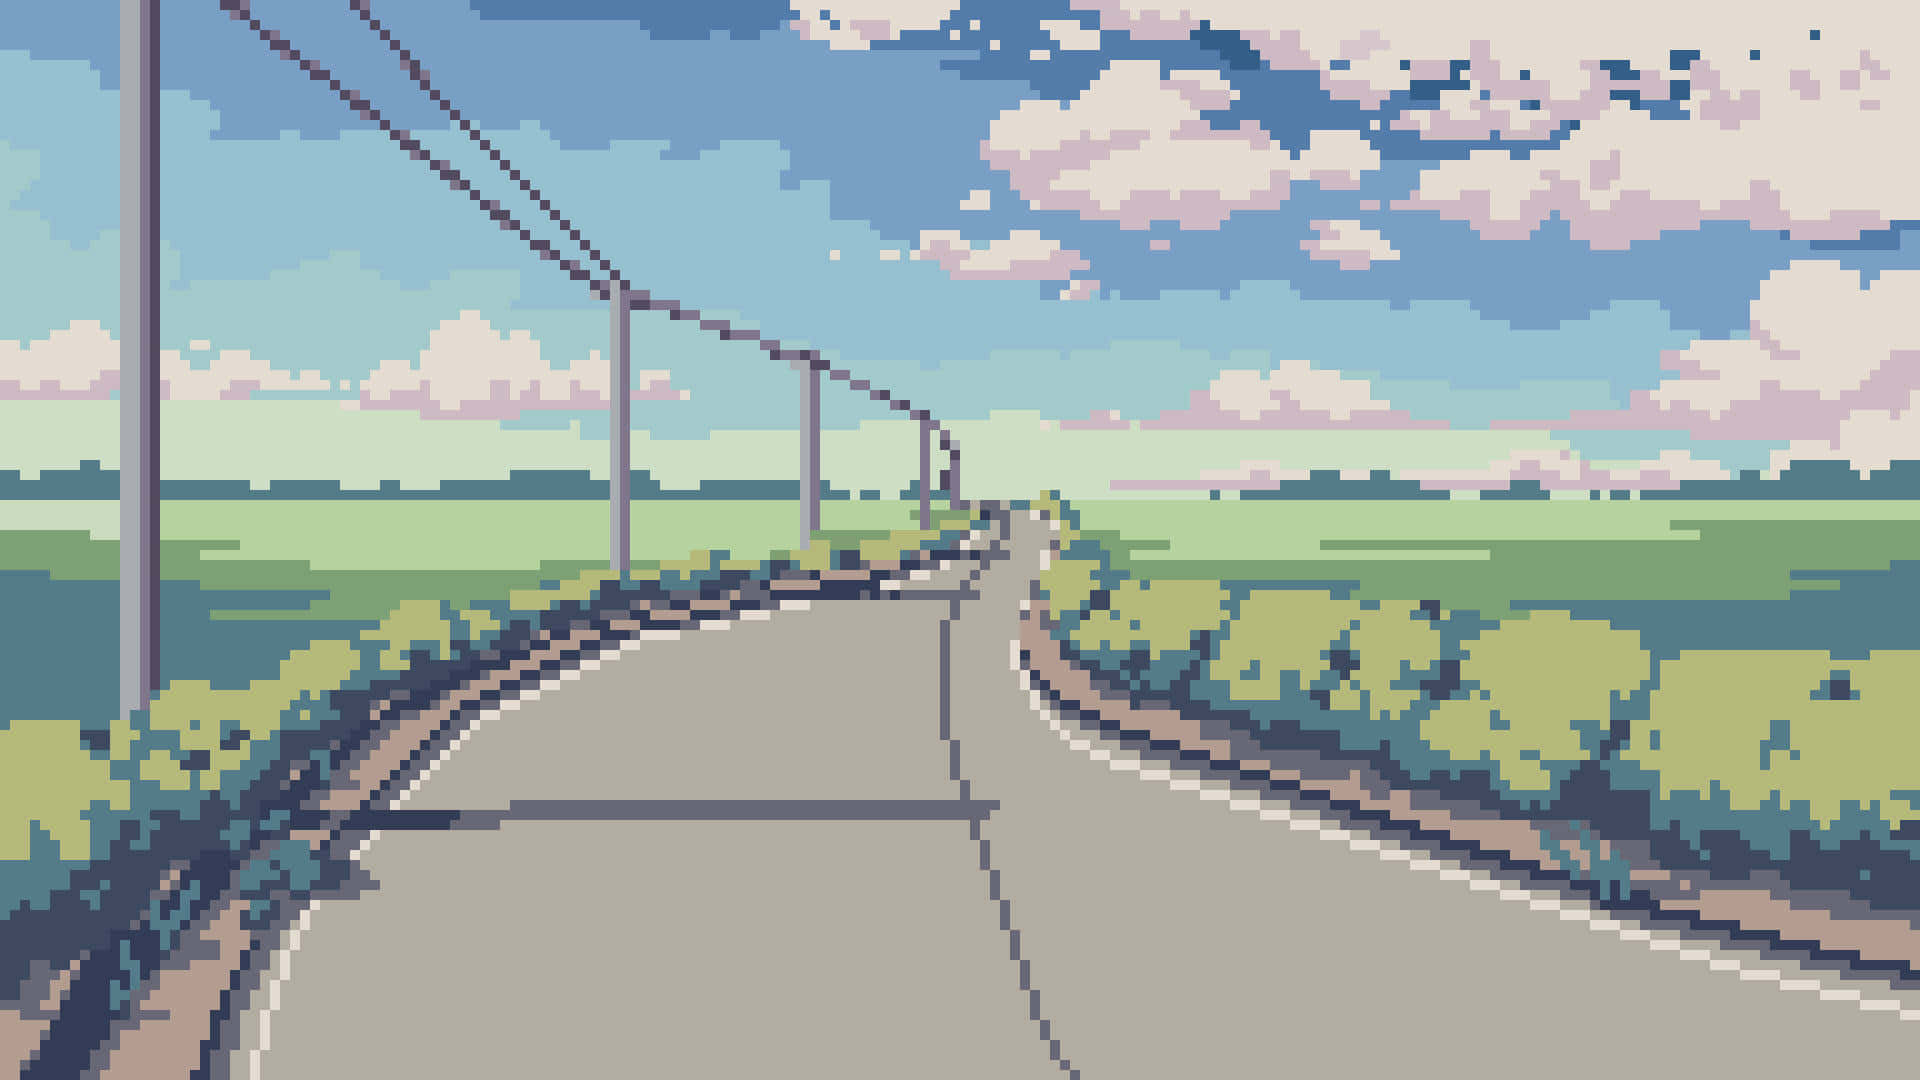 Pixel Art Of A Road With Trees And Grass